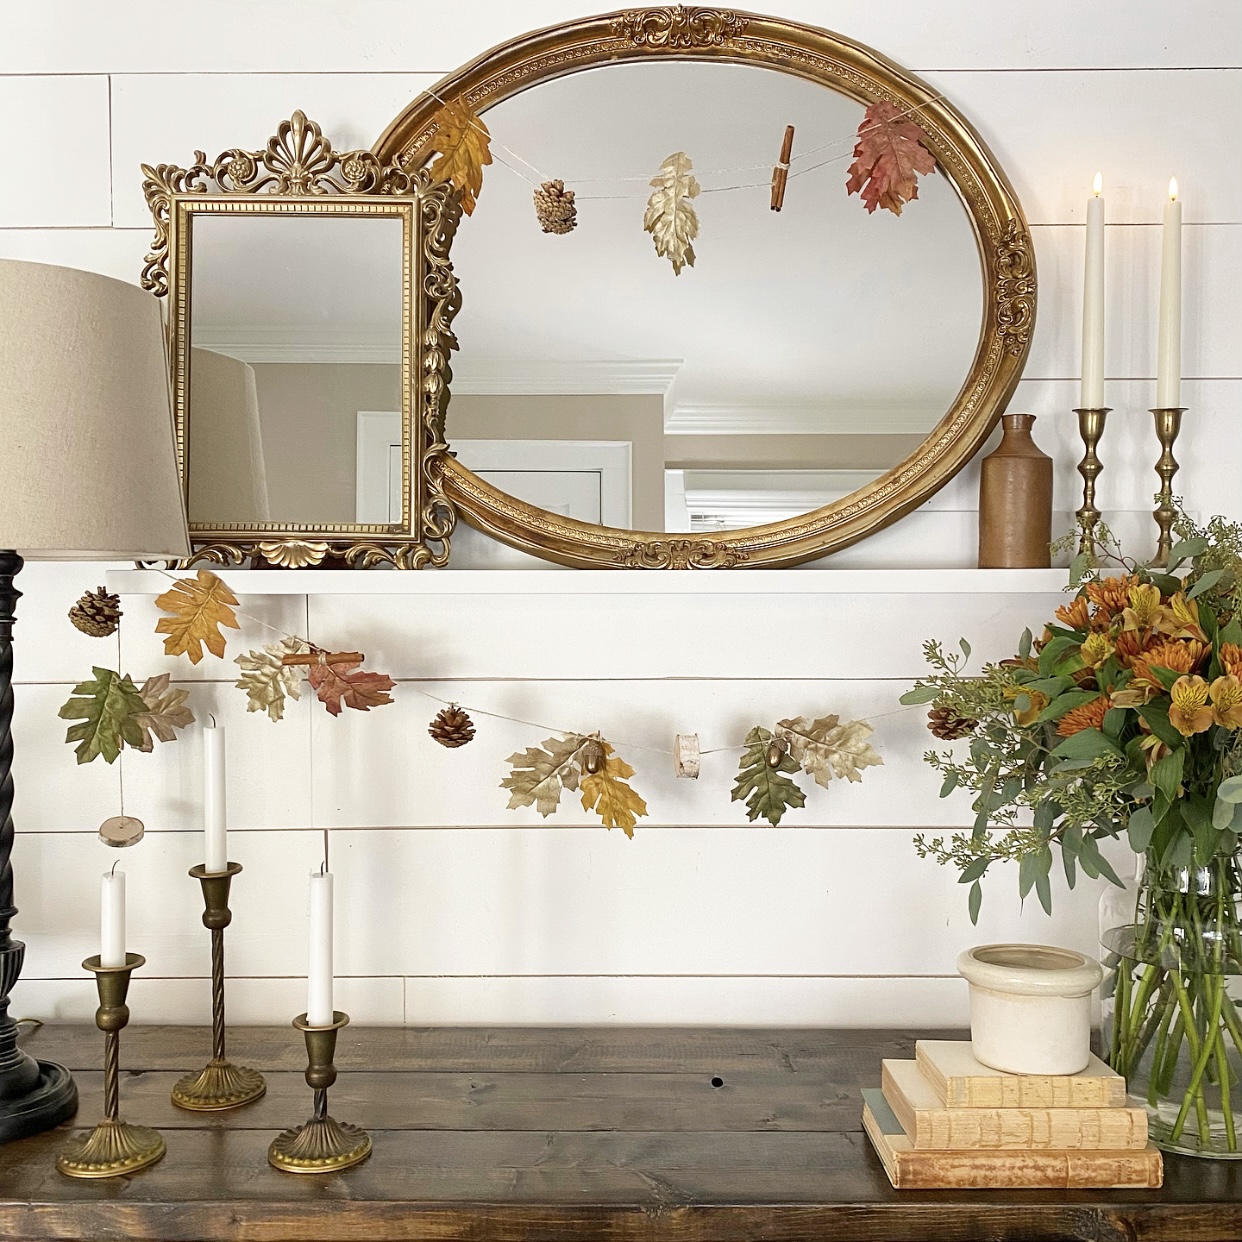 Table with antique bronze candlesticks, Fall florals, and old books styled on it. A shelf on the wall above the table has layered mirrors and Fall garland hanging from it.